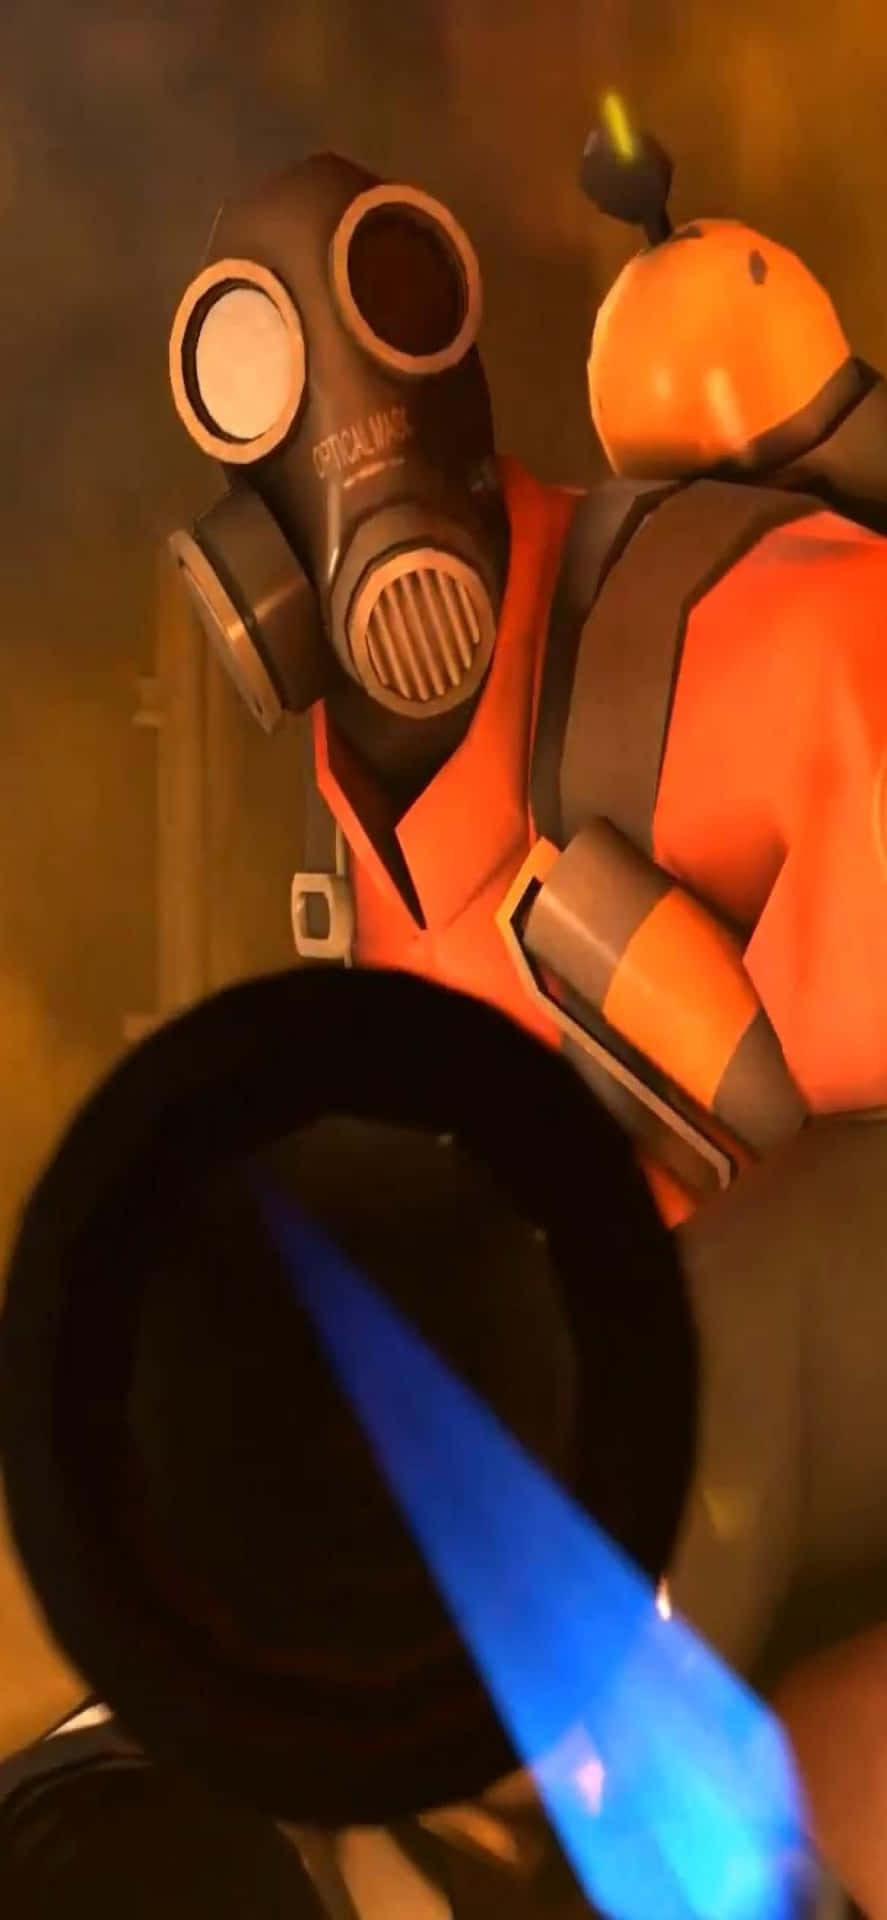 Iphone Xs Tf2 Background Pyro Aiming His Flamethrower